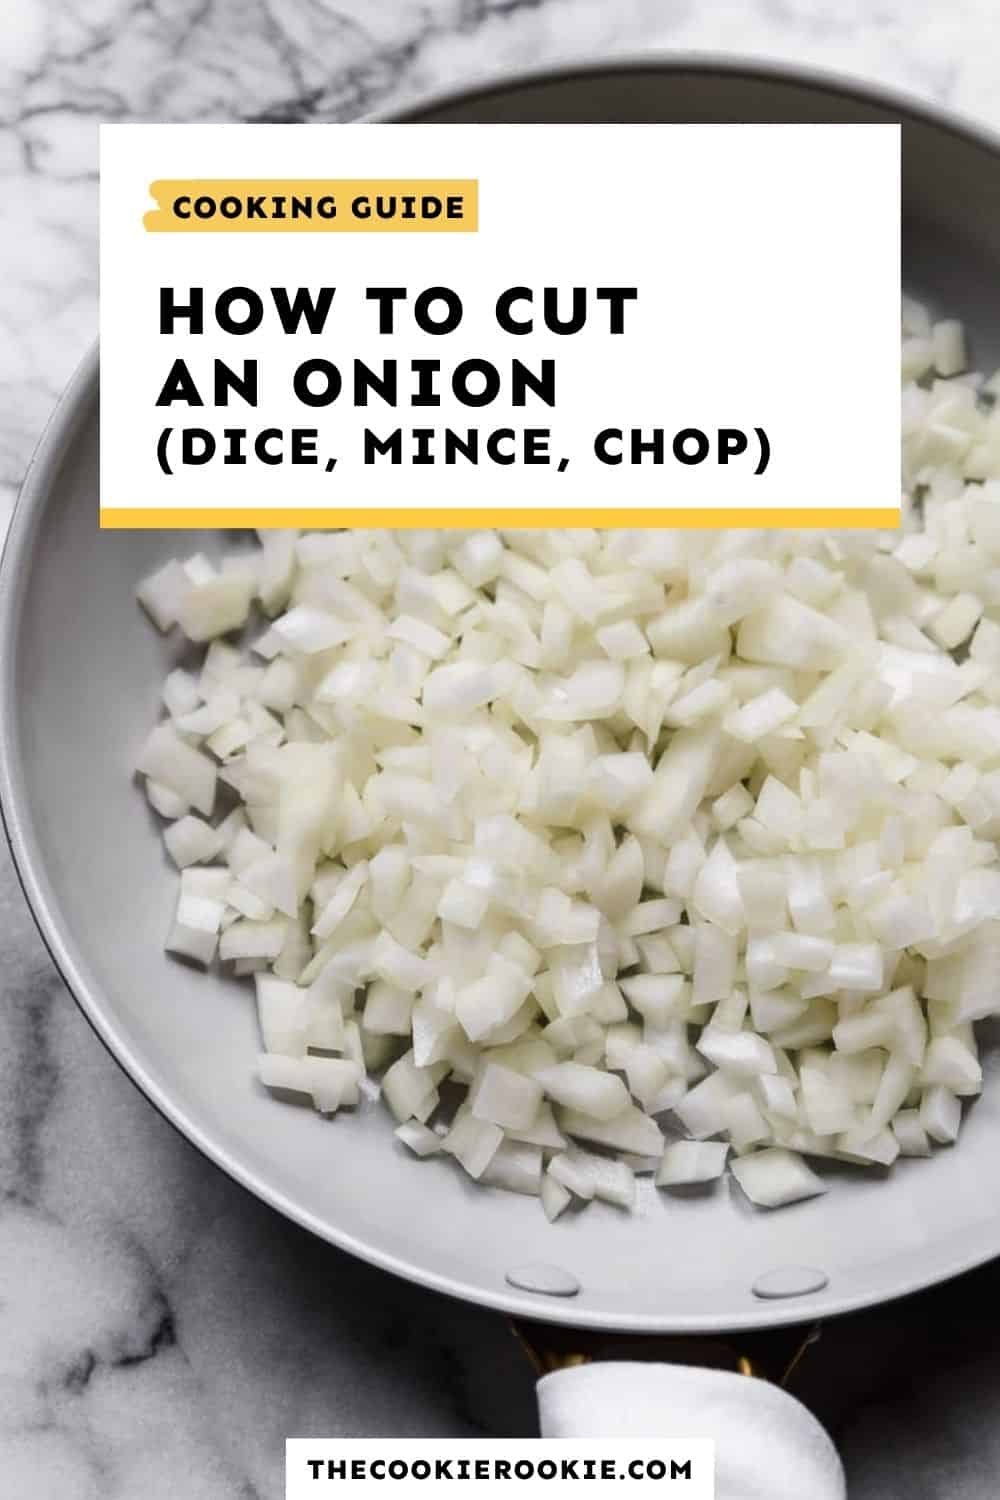 https://www.thecookierookie.com/wp-content/uploads/2019/02/how-to-cut-an-onion.jpg